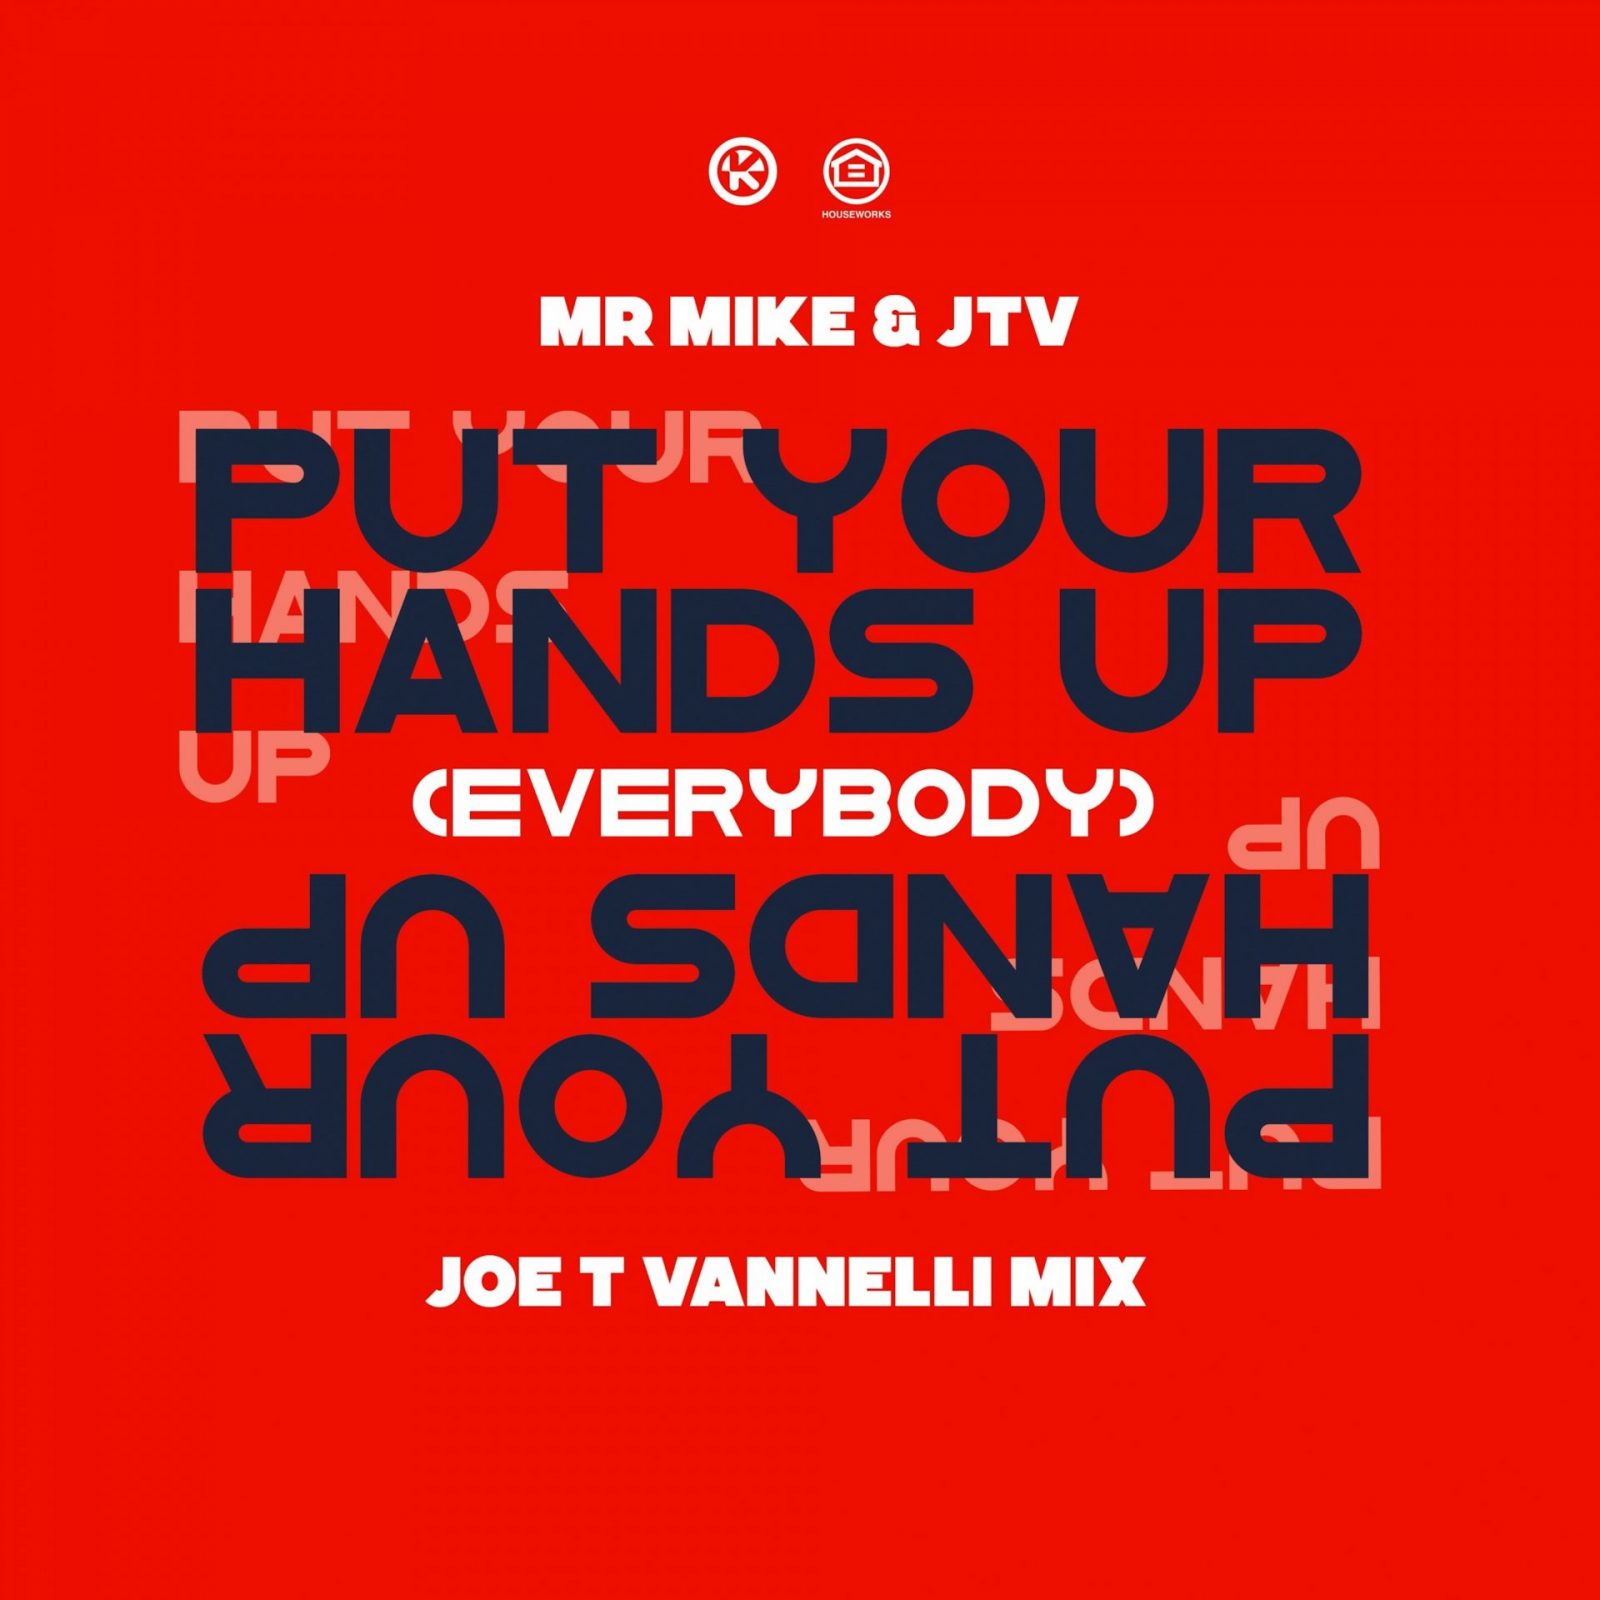 MR. MIKE & JTV – PUT YOUR HANDS UP [EVERYBODY] (JOE T VANNELLI REMIX)